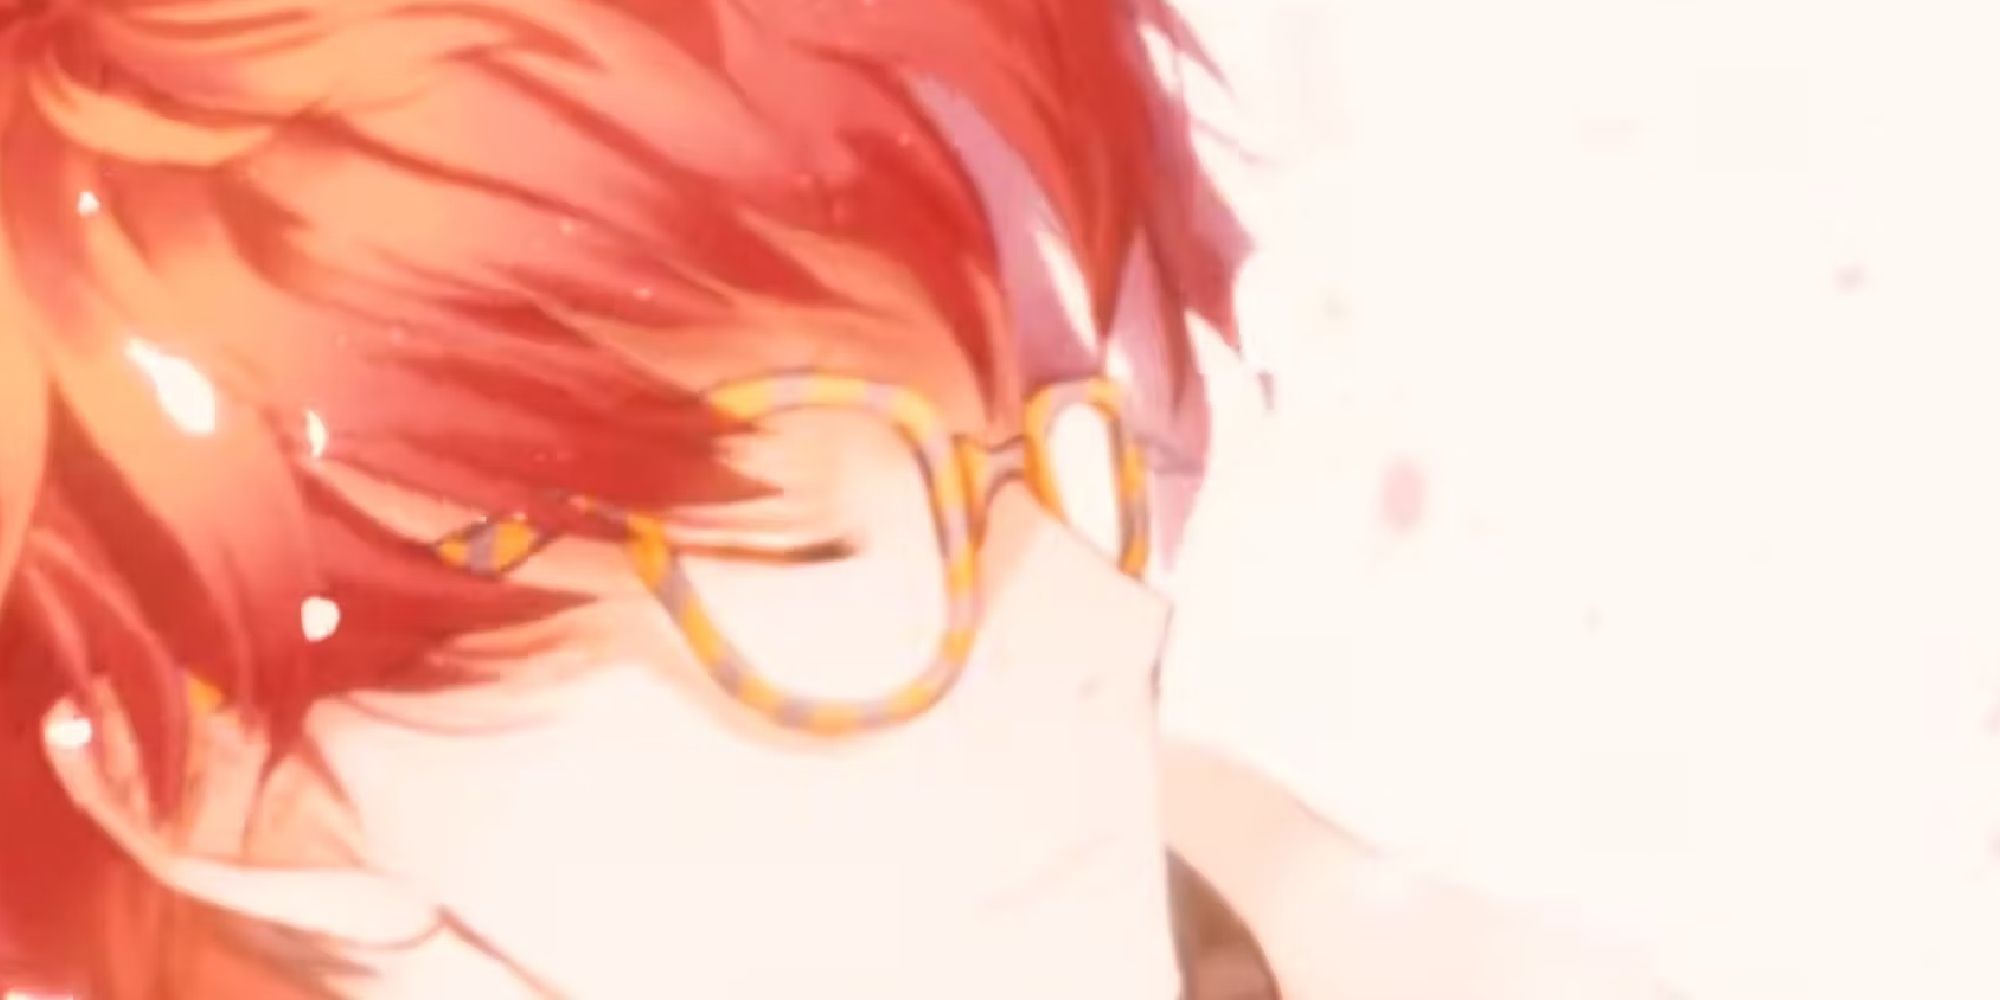 707 thinking with eyes closed